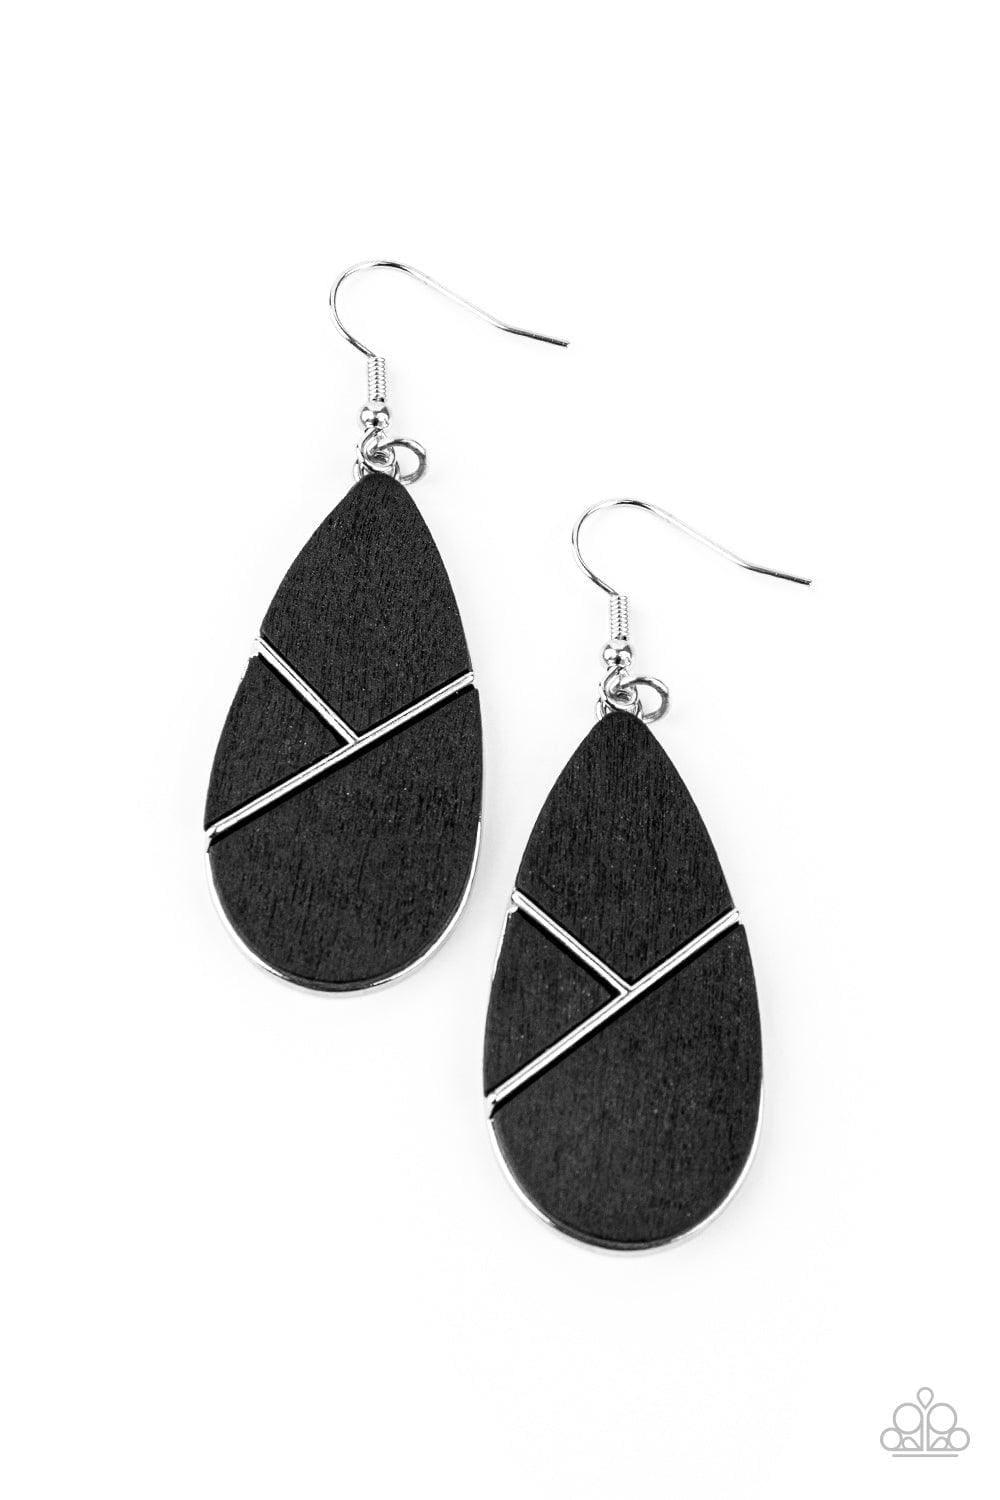 Paparazzi Accessories - Sequoia Forest - Black Earrings - Bling by JessieK